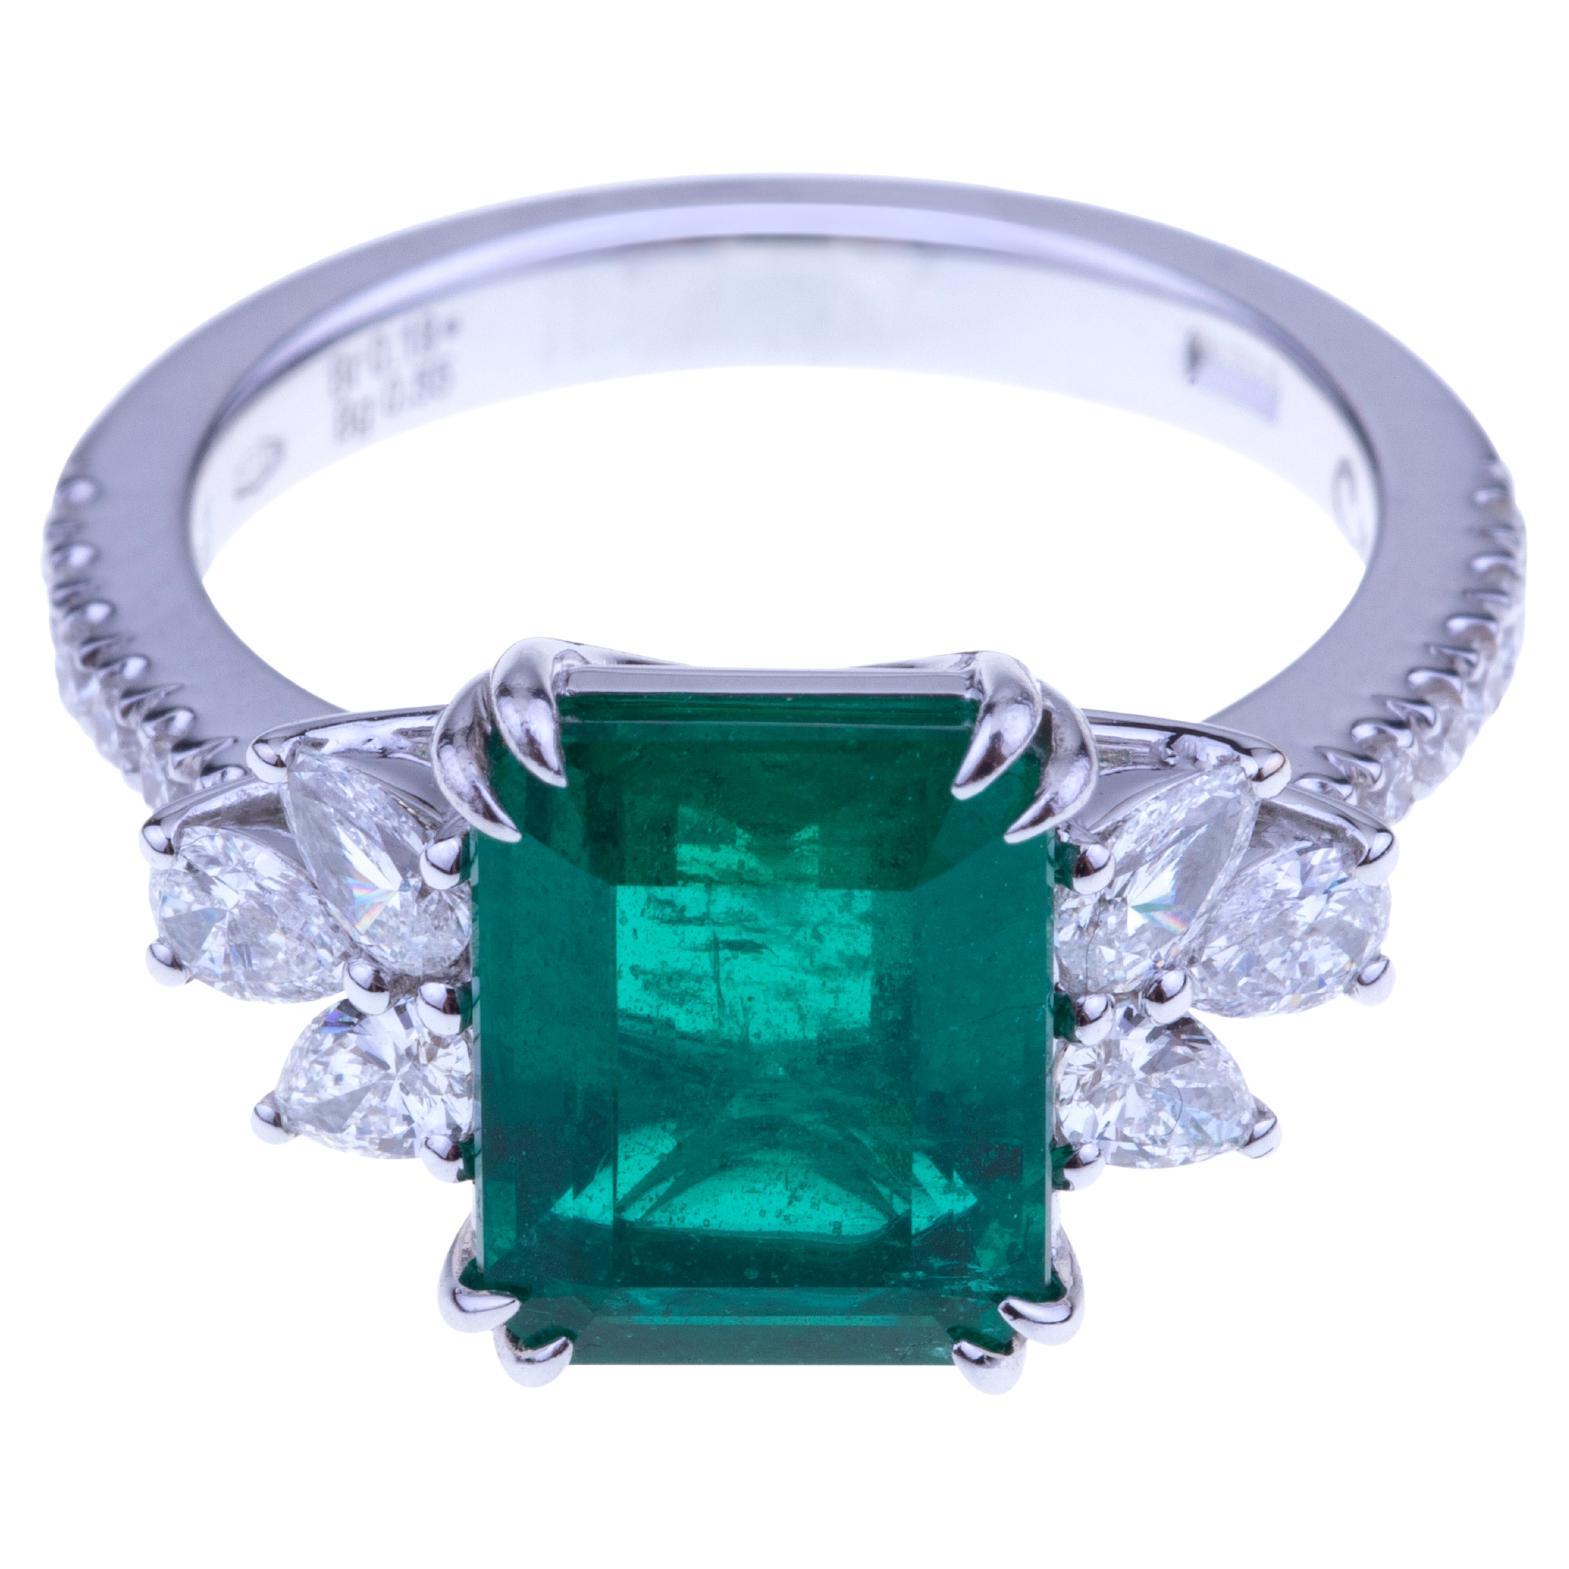 Stunning Emerald Ring ct. 3.20 with Diamonds. Unique Stone with Certificate.
Classic Design for this Ring with a Stunning Emerald (ct. 3.20 Certificate) origin with Diamonds on the side (ct. 073 Round).
Designed in Italy.
Angeletti Boasts an